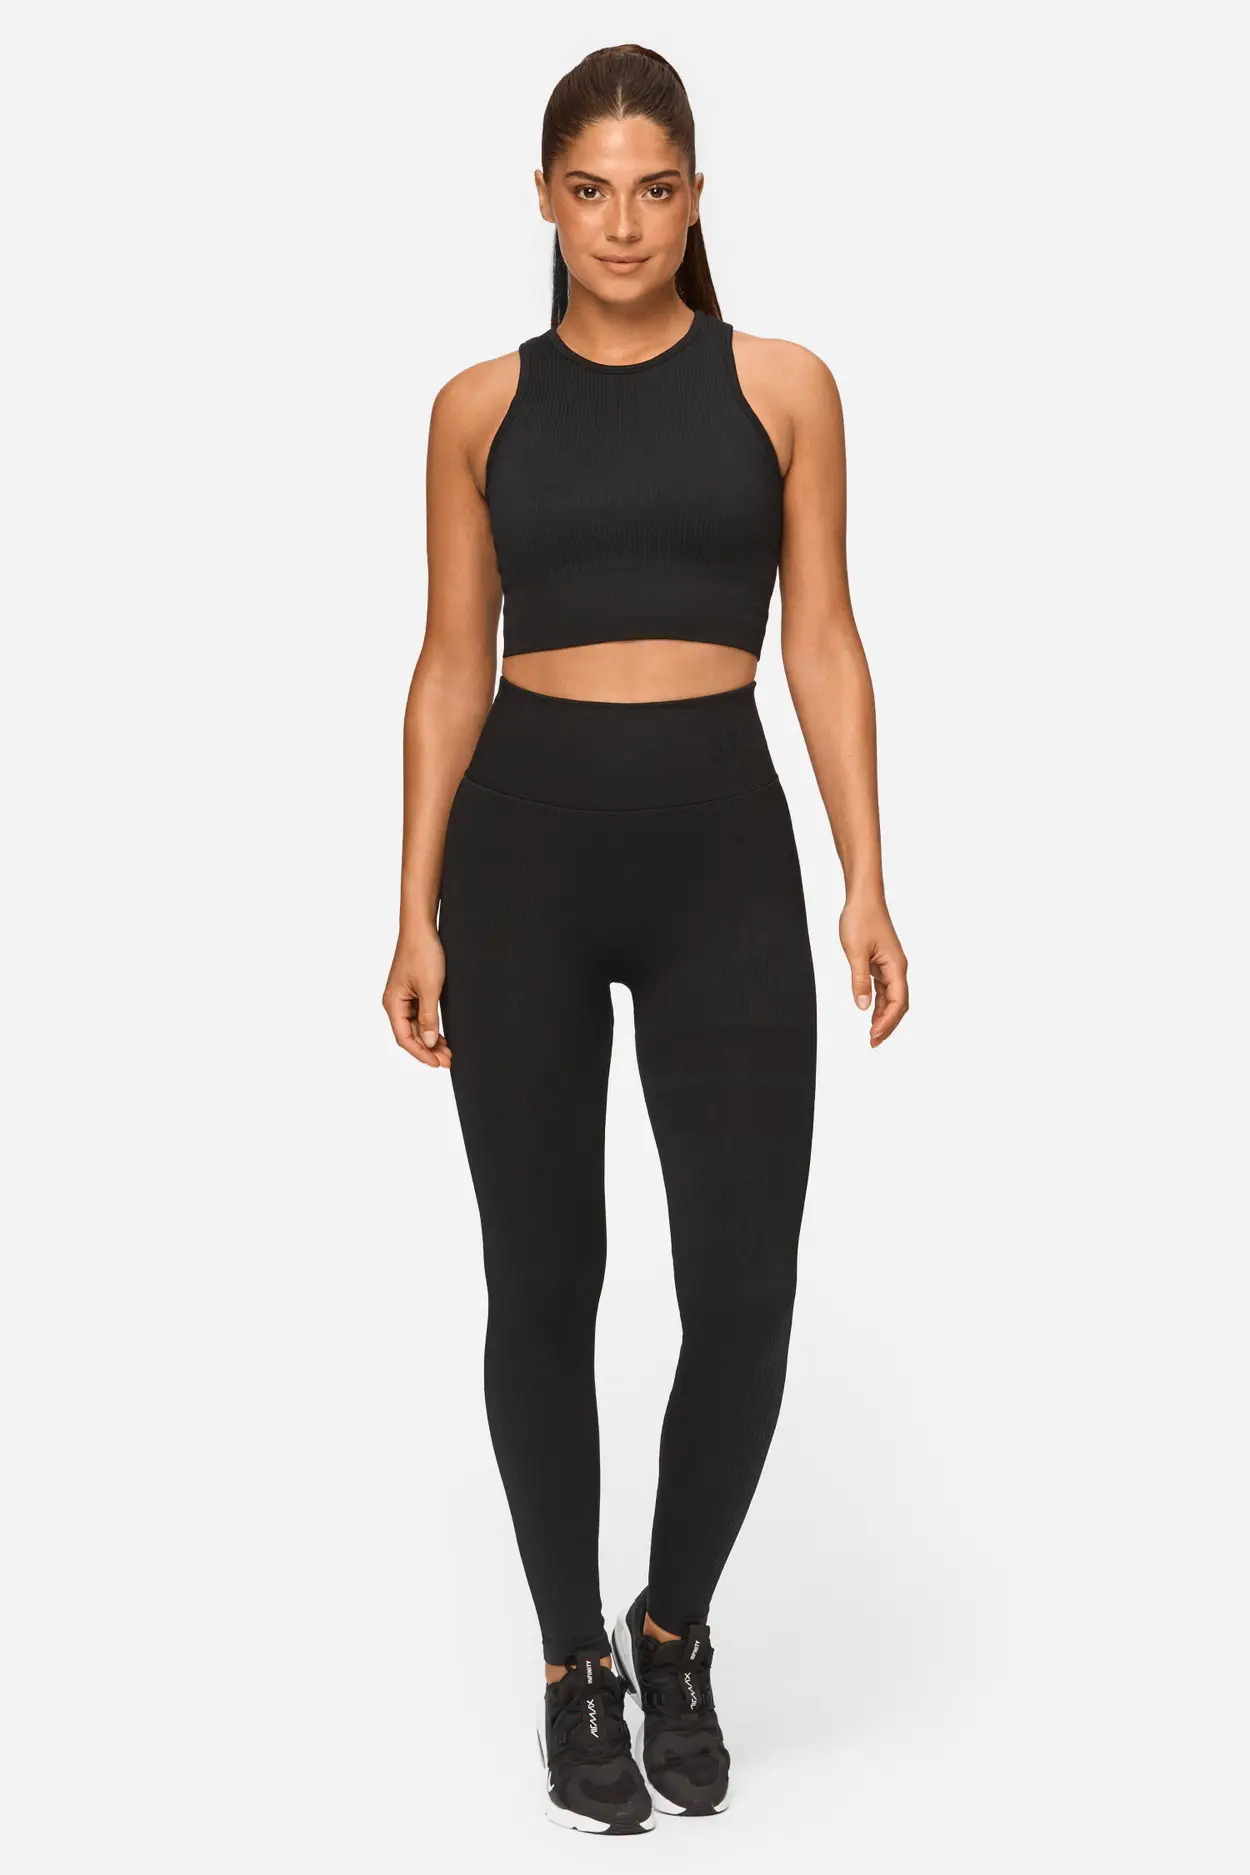 Zip Up Cropped Top and Leggings Yoga Set - Blue / L  Crop top and leggings,  Types of sleeves, Crop tops